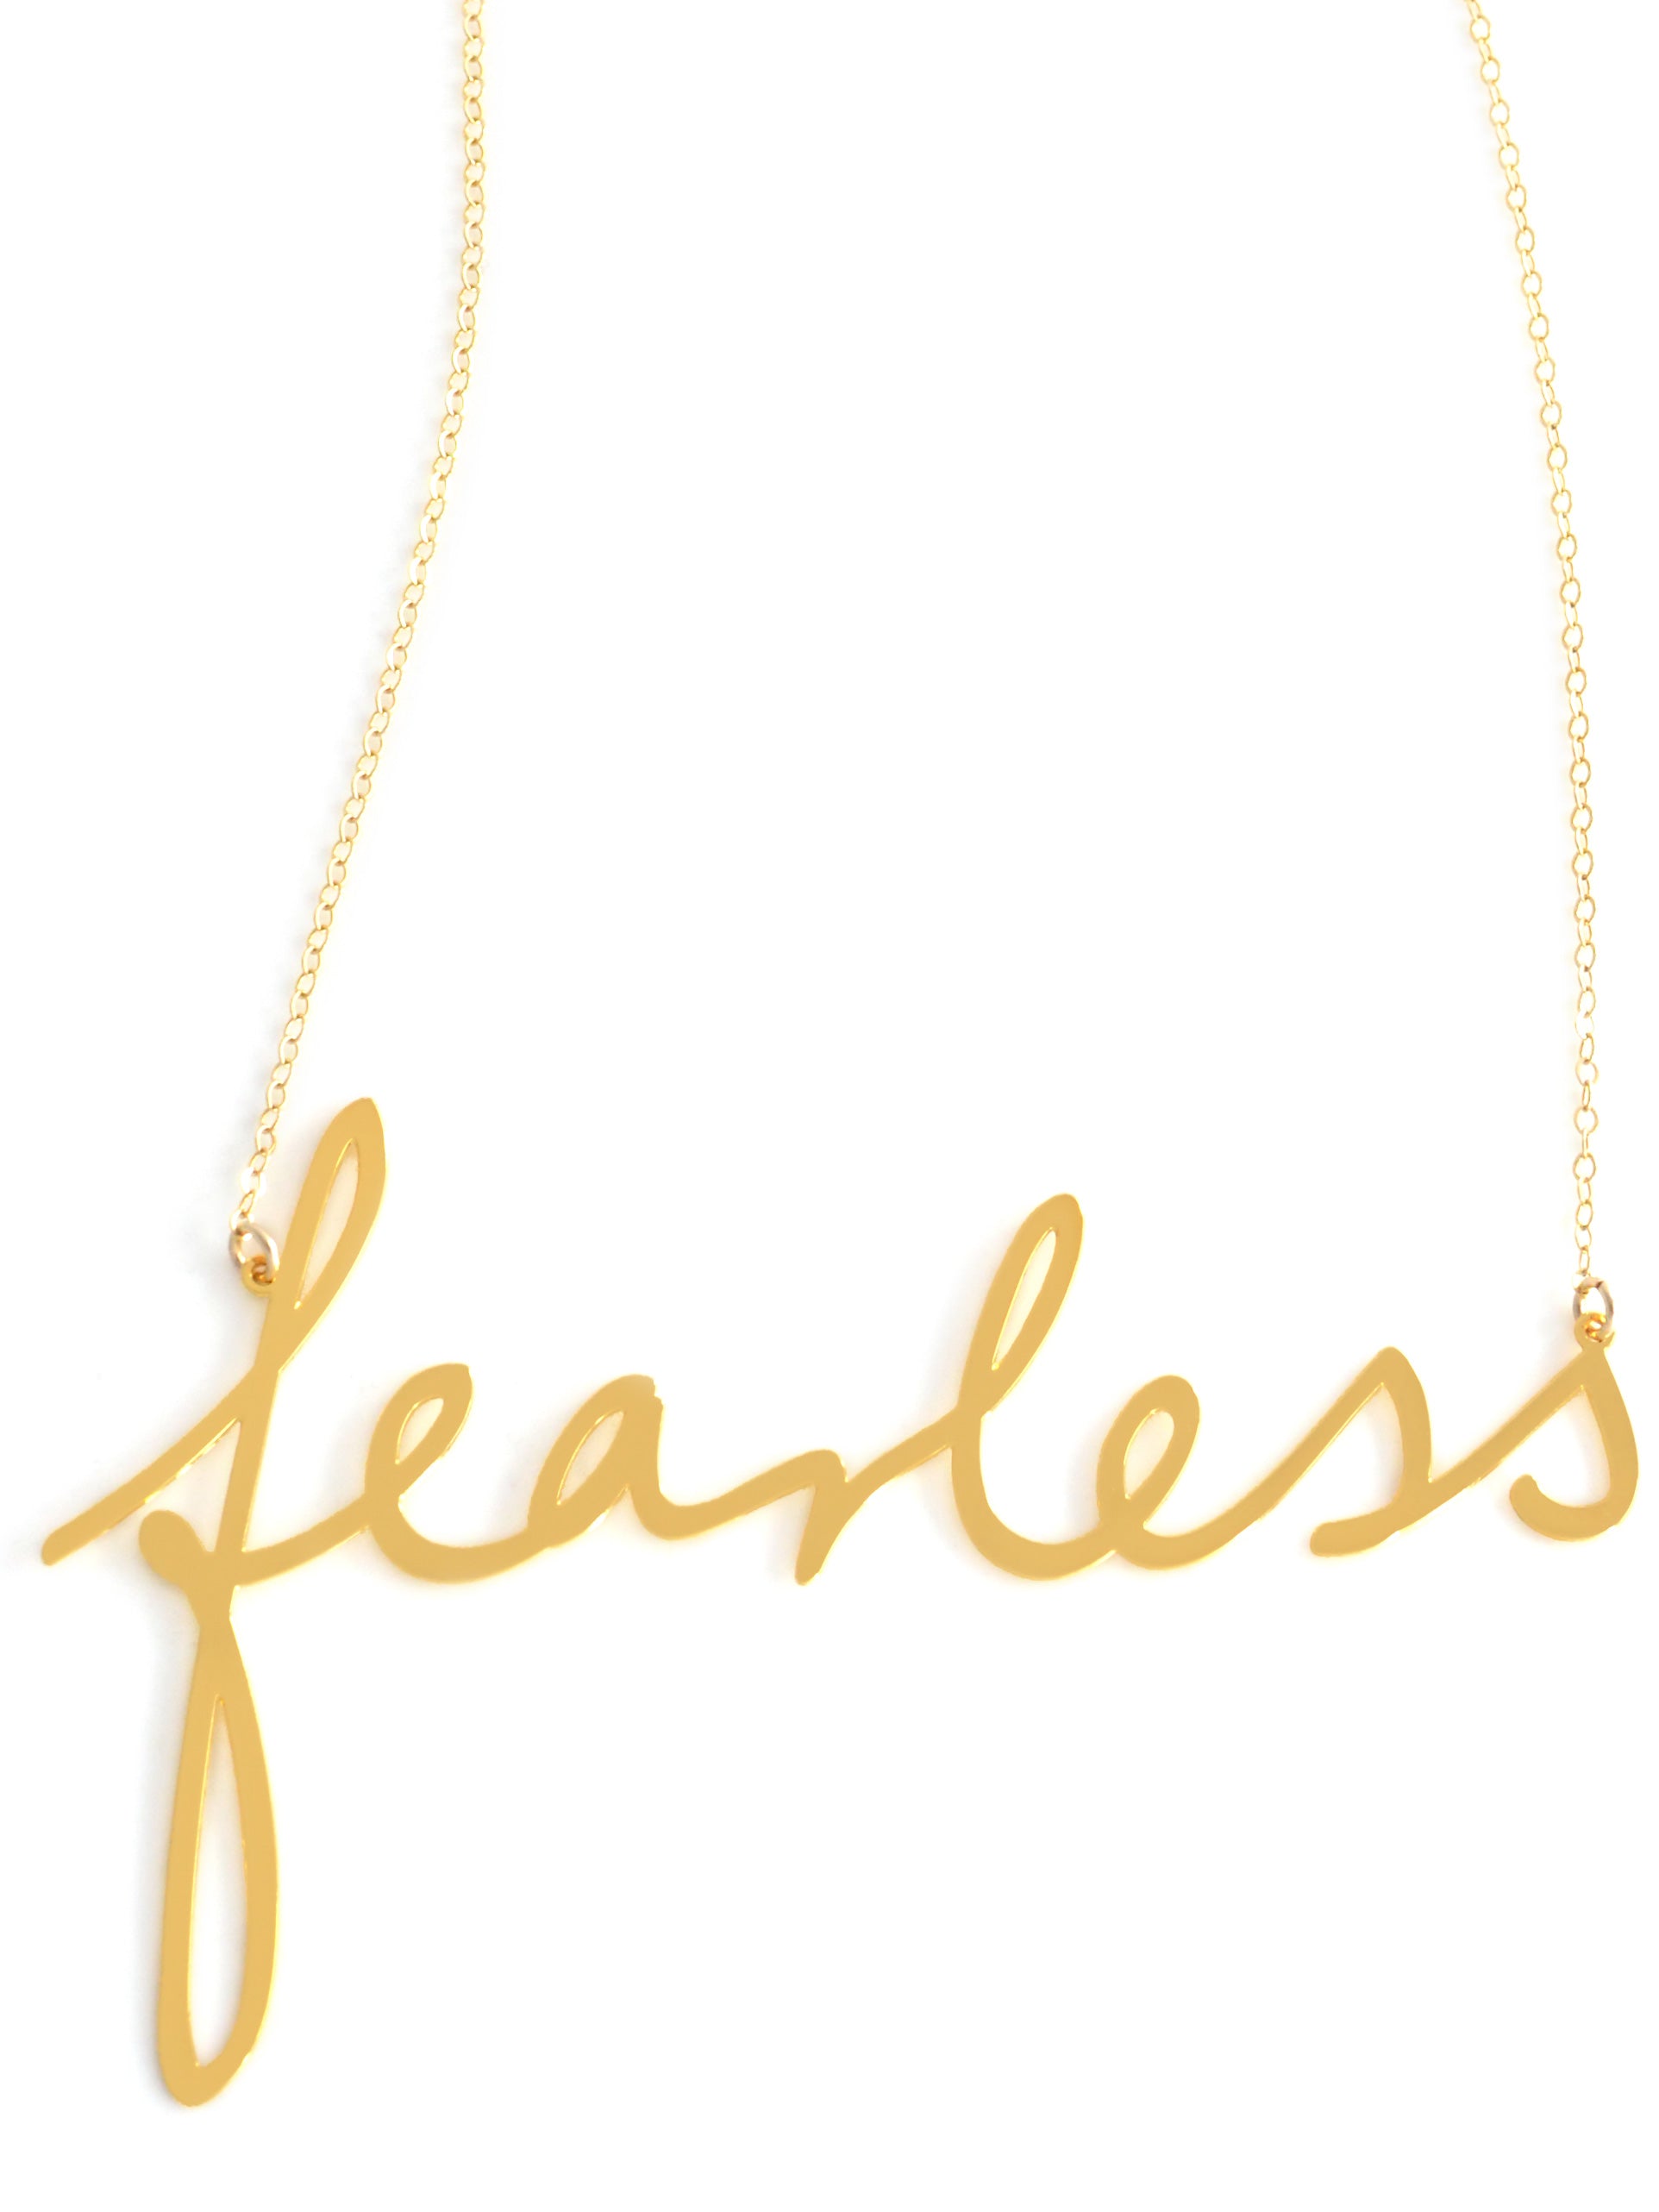 Fearless Necklace - High Quality, Affordable, Hand Written, Empowering, Self Love, Mantra Word Necklace - Available in Gold and Silver - Small and Large Sizes - Made in USA - Brevity Jewelry